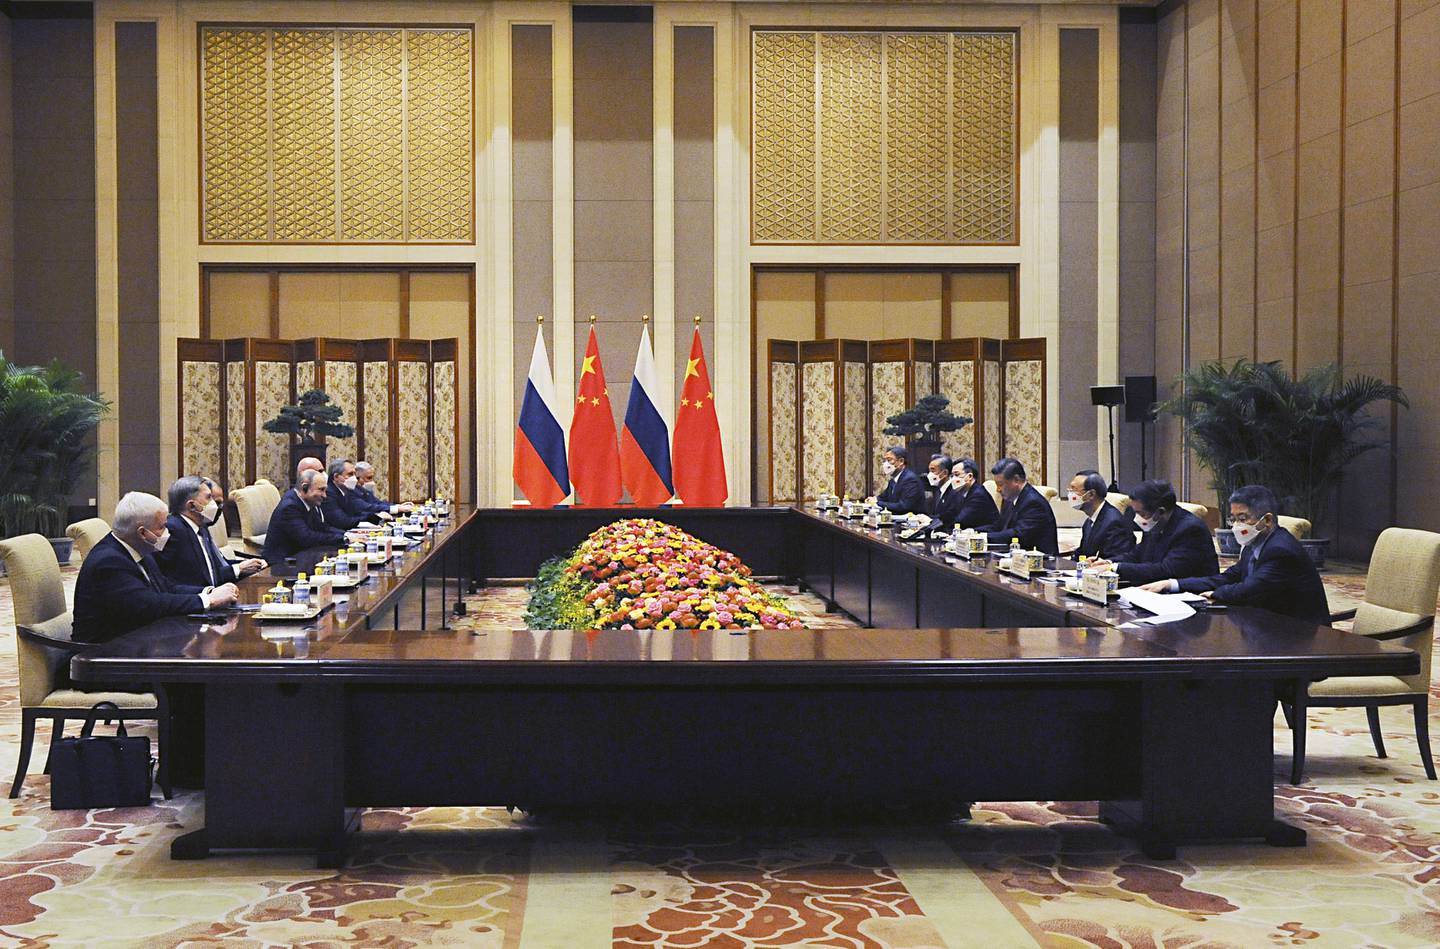 Chinese President Xi Jinping, fourth right, and Russian President Vladimir Putin, fourth left, attend talks in Beijing, China, February  4, 2022. Kremlin Pool Photo via AP